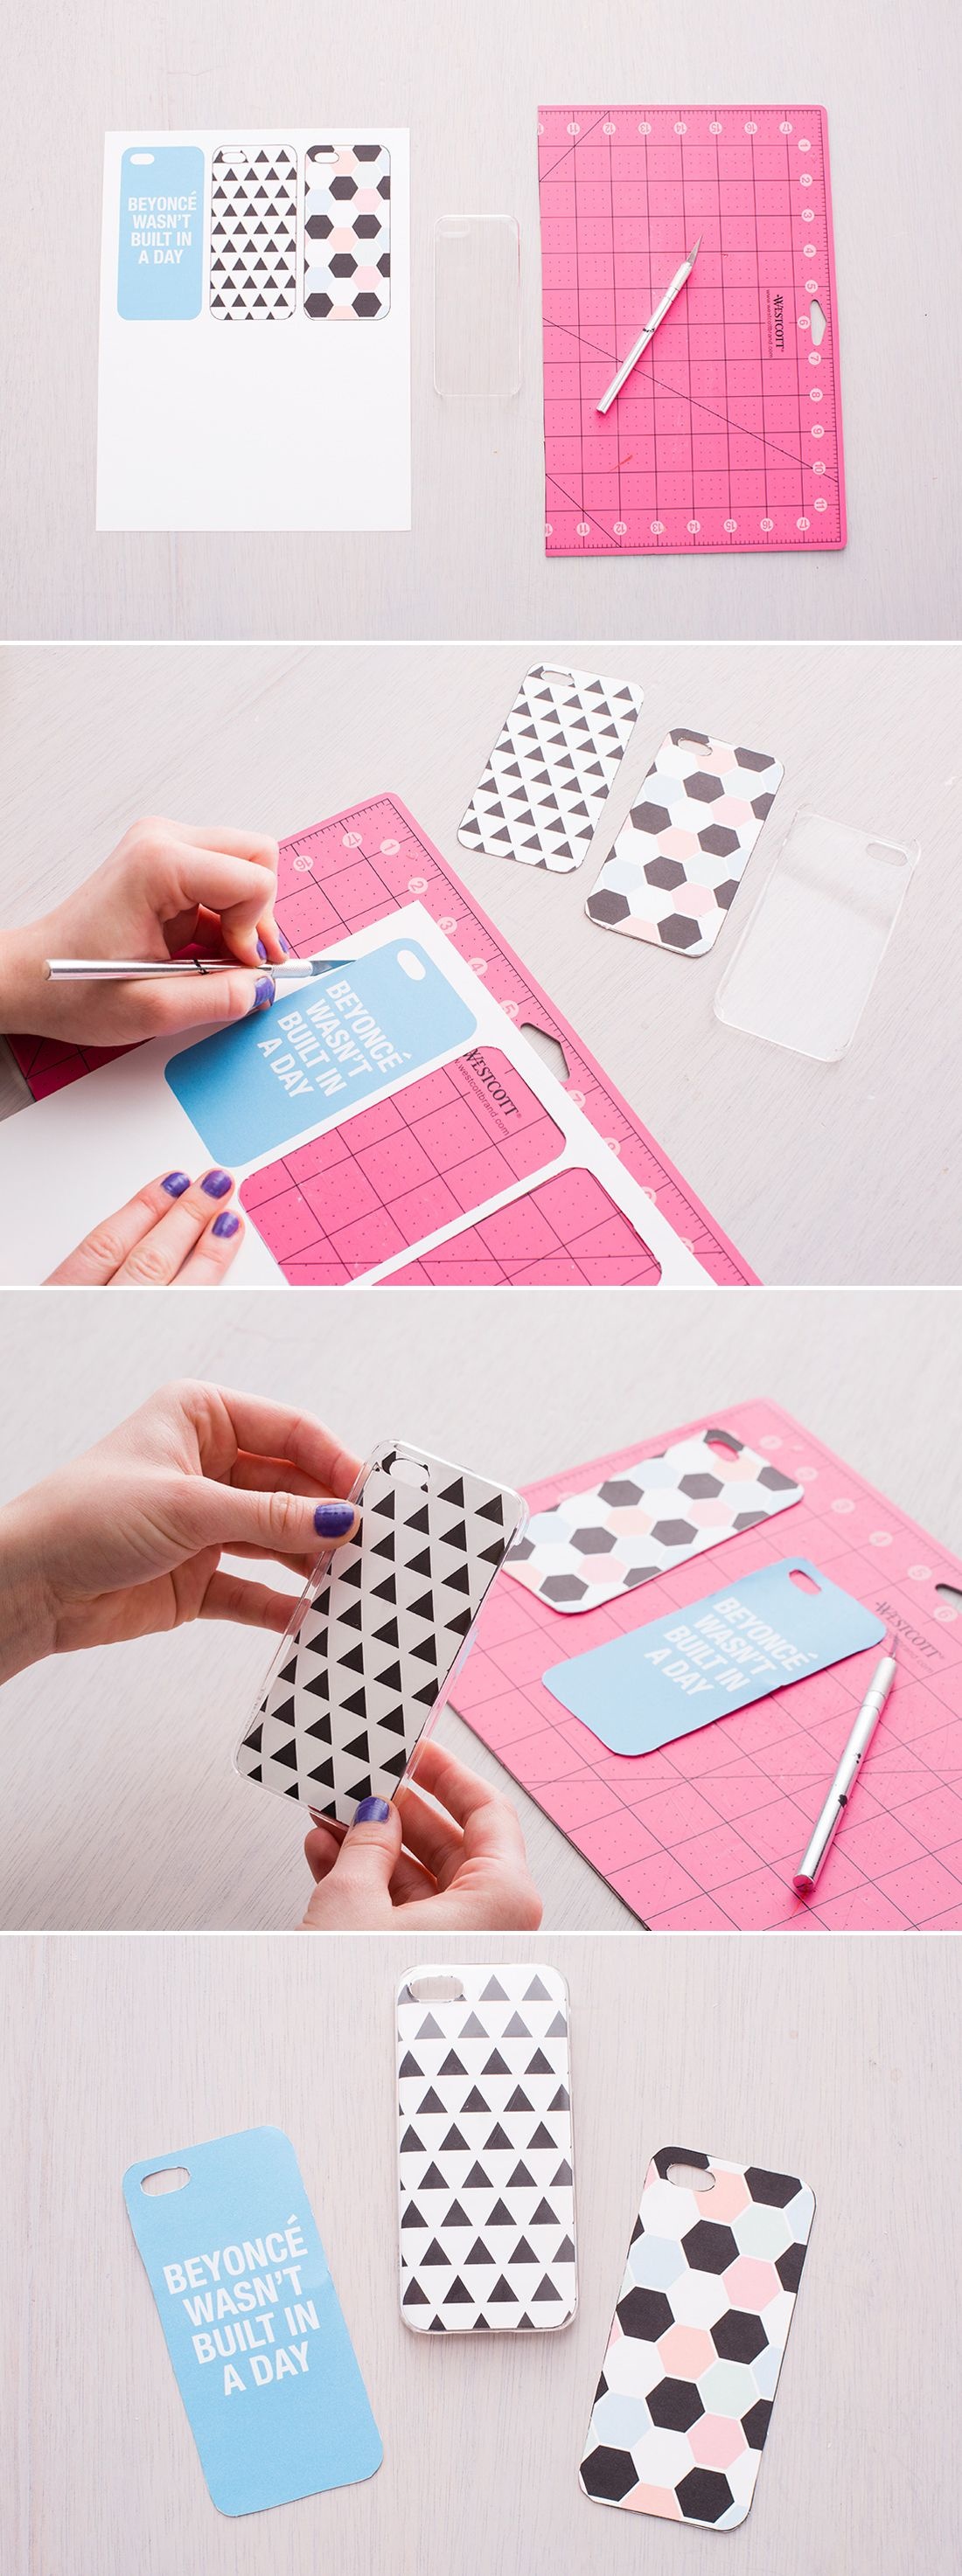 Diy A New Iphone Case With These Free Printables. | Crafts, Projects - Free Printable Iphone Skins